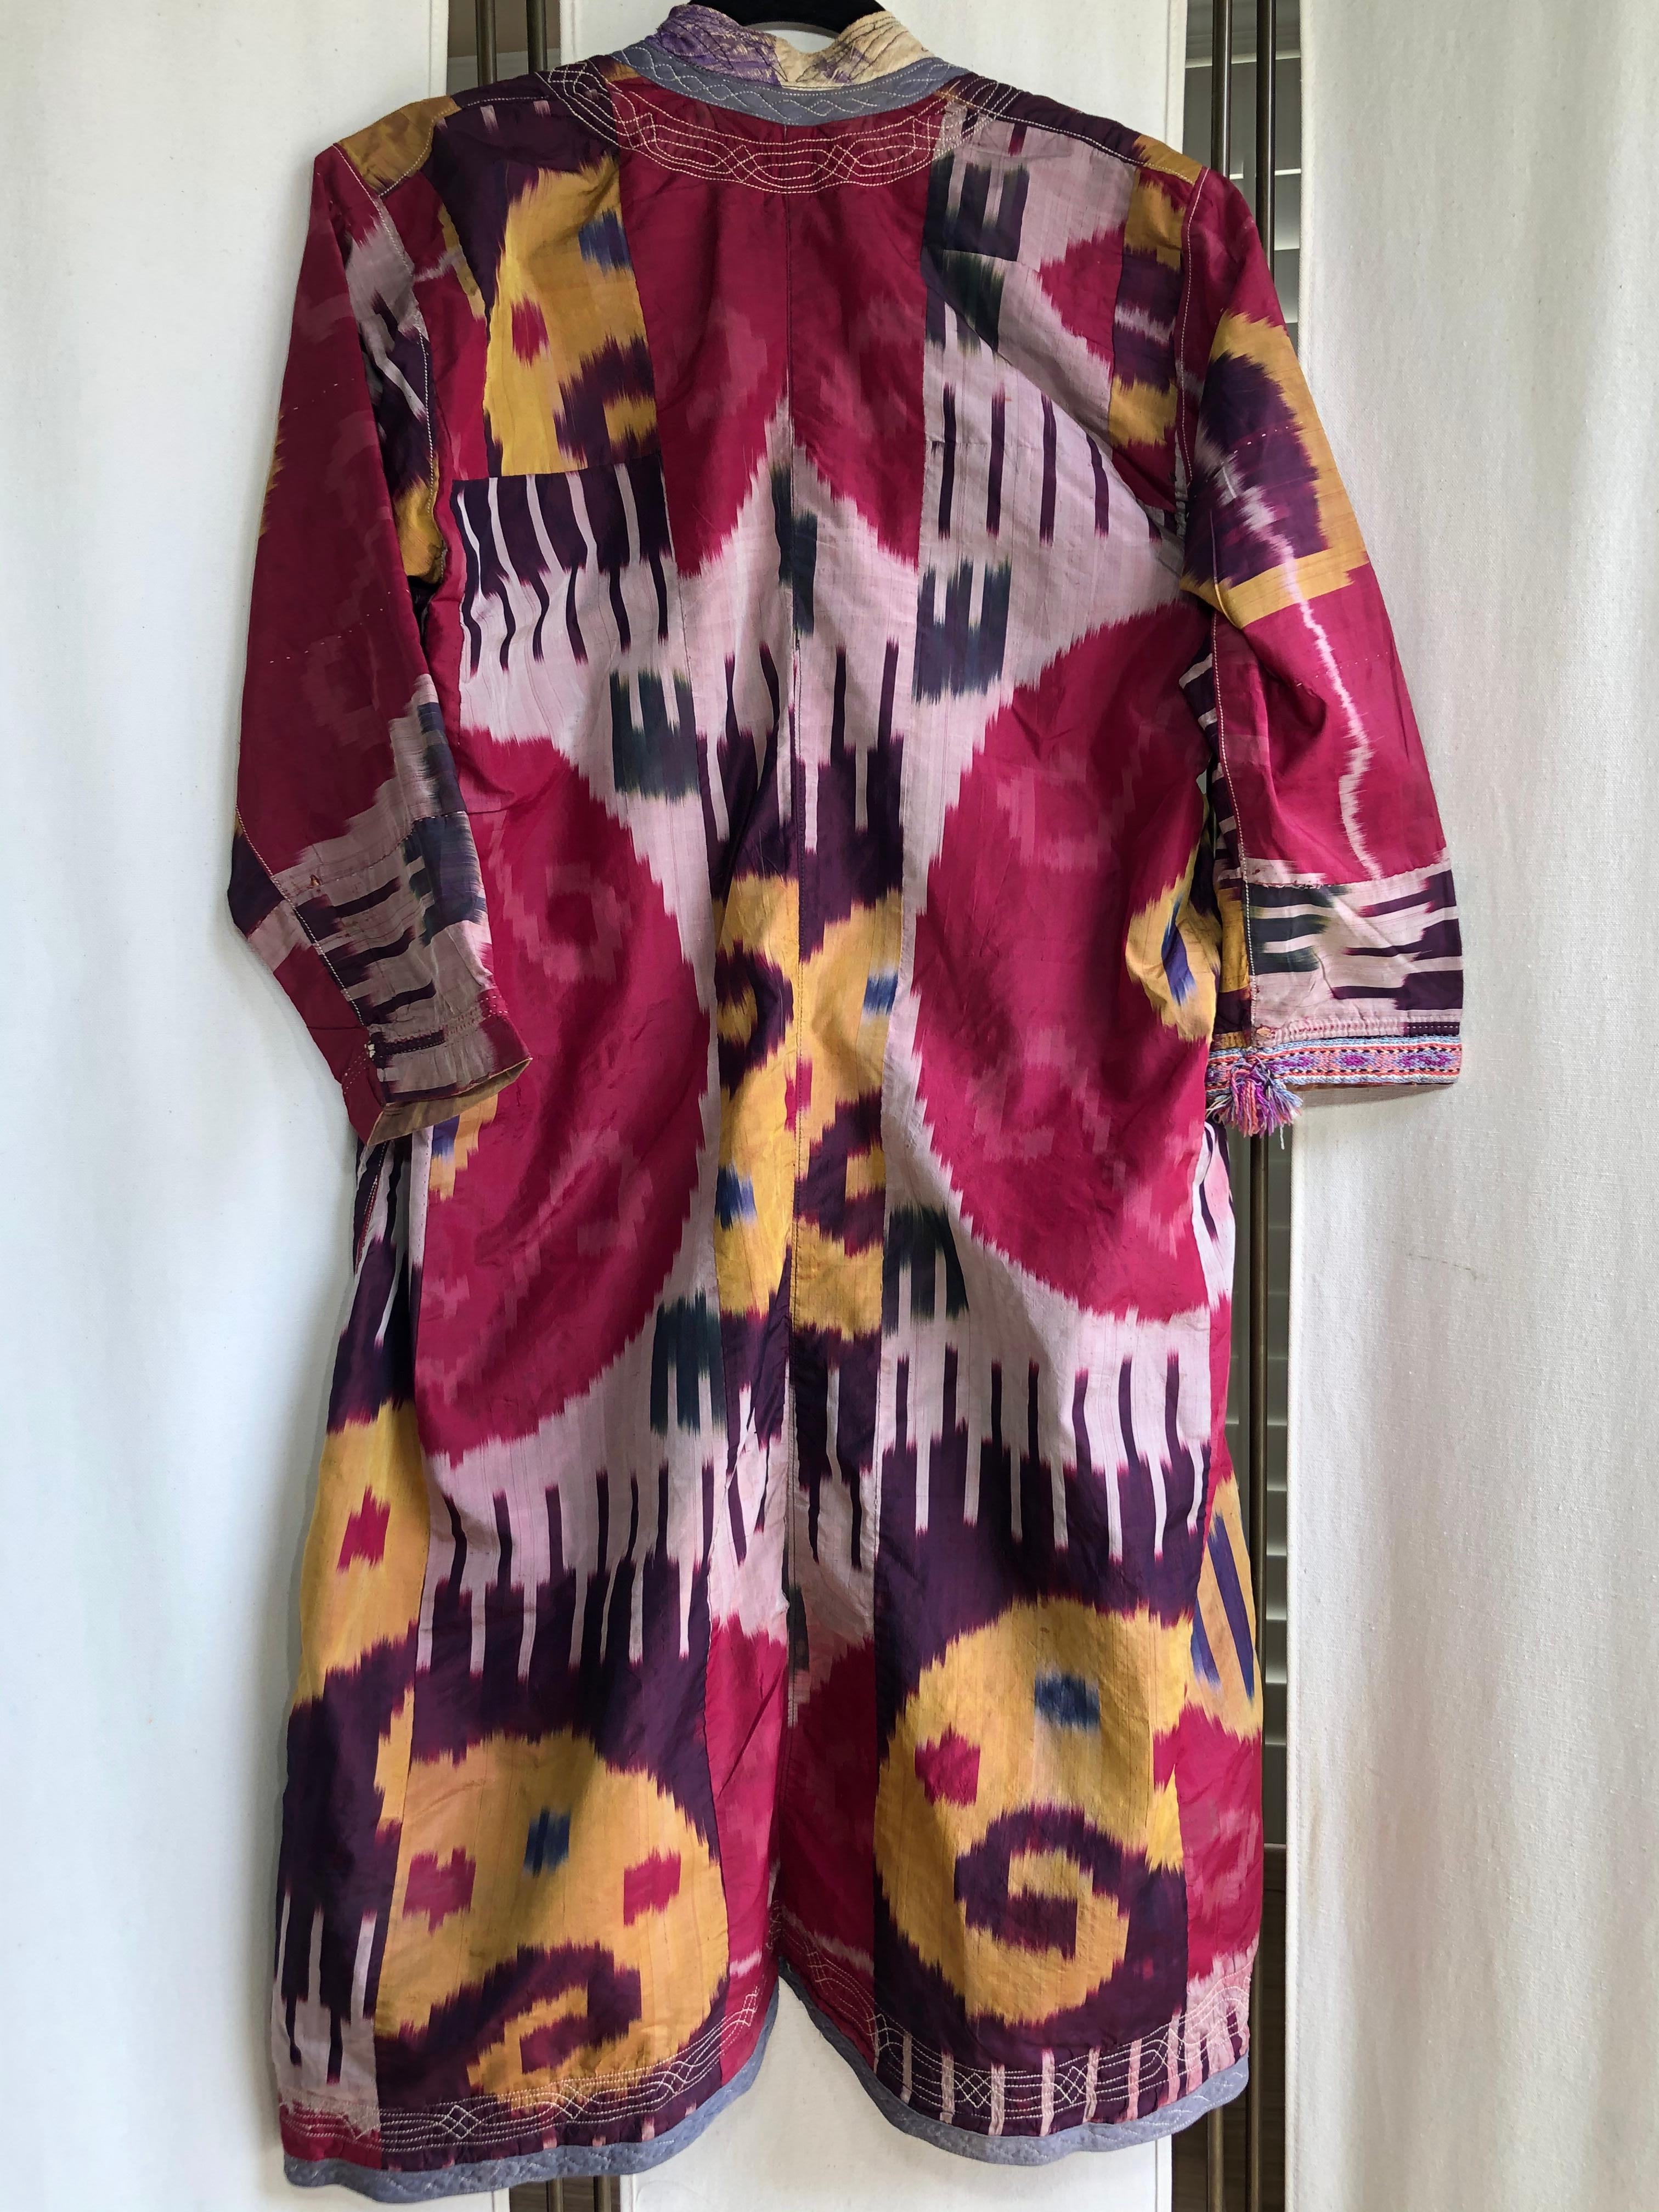 Beautiful bright and colorful Antique Ikat silk Dyed Uzbek Robe. Has minor wear and tear shown in photos. Colors: Fuchsia, light pink, purple, yellow and blue.
Approximately size medium-large
Shoulder size 17”
Sleeve length 17”
Outfit height